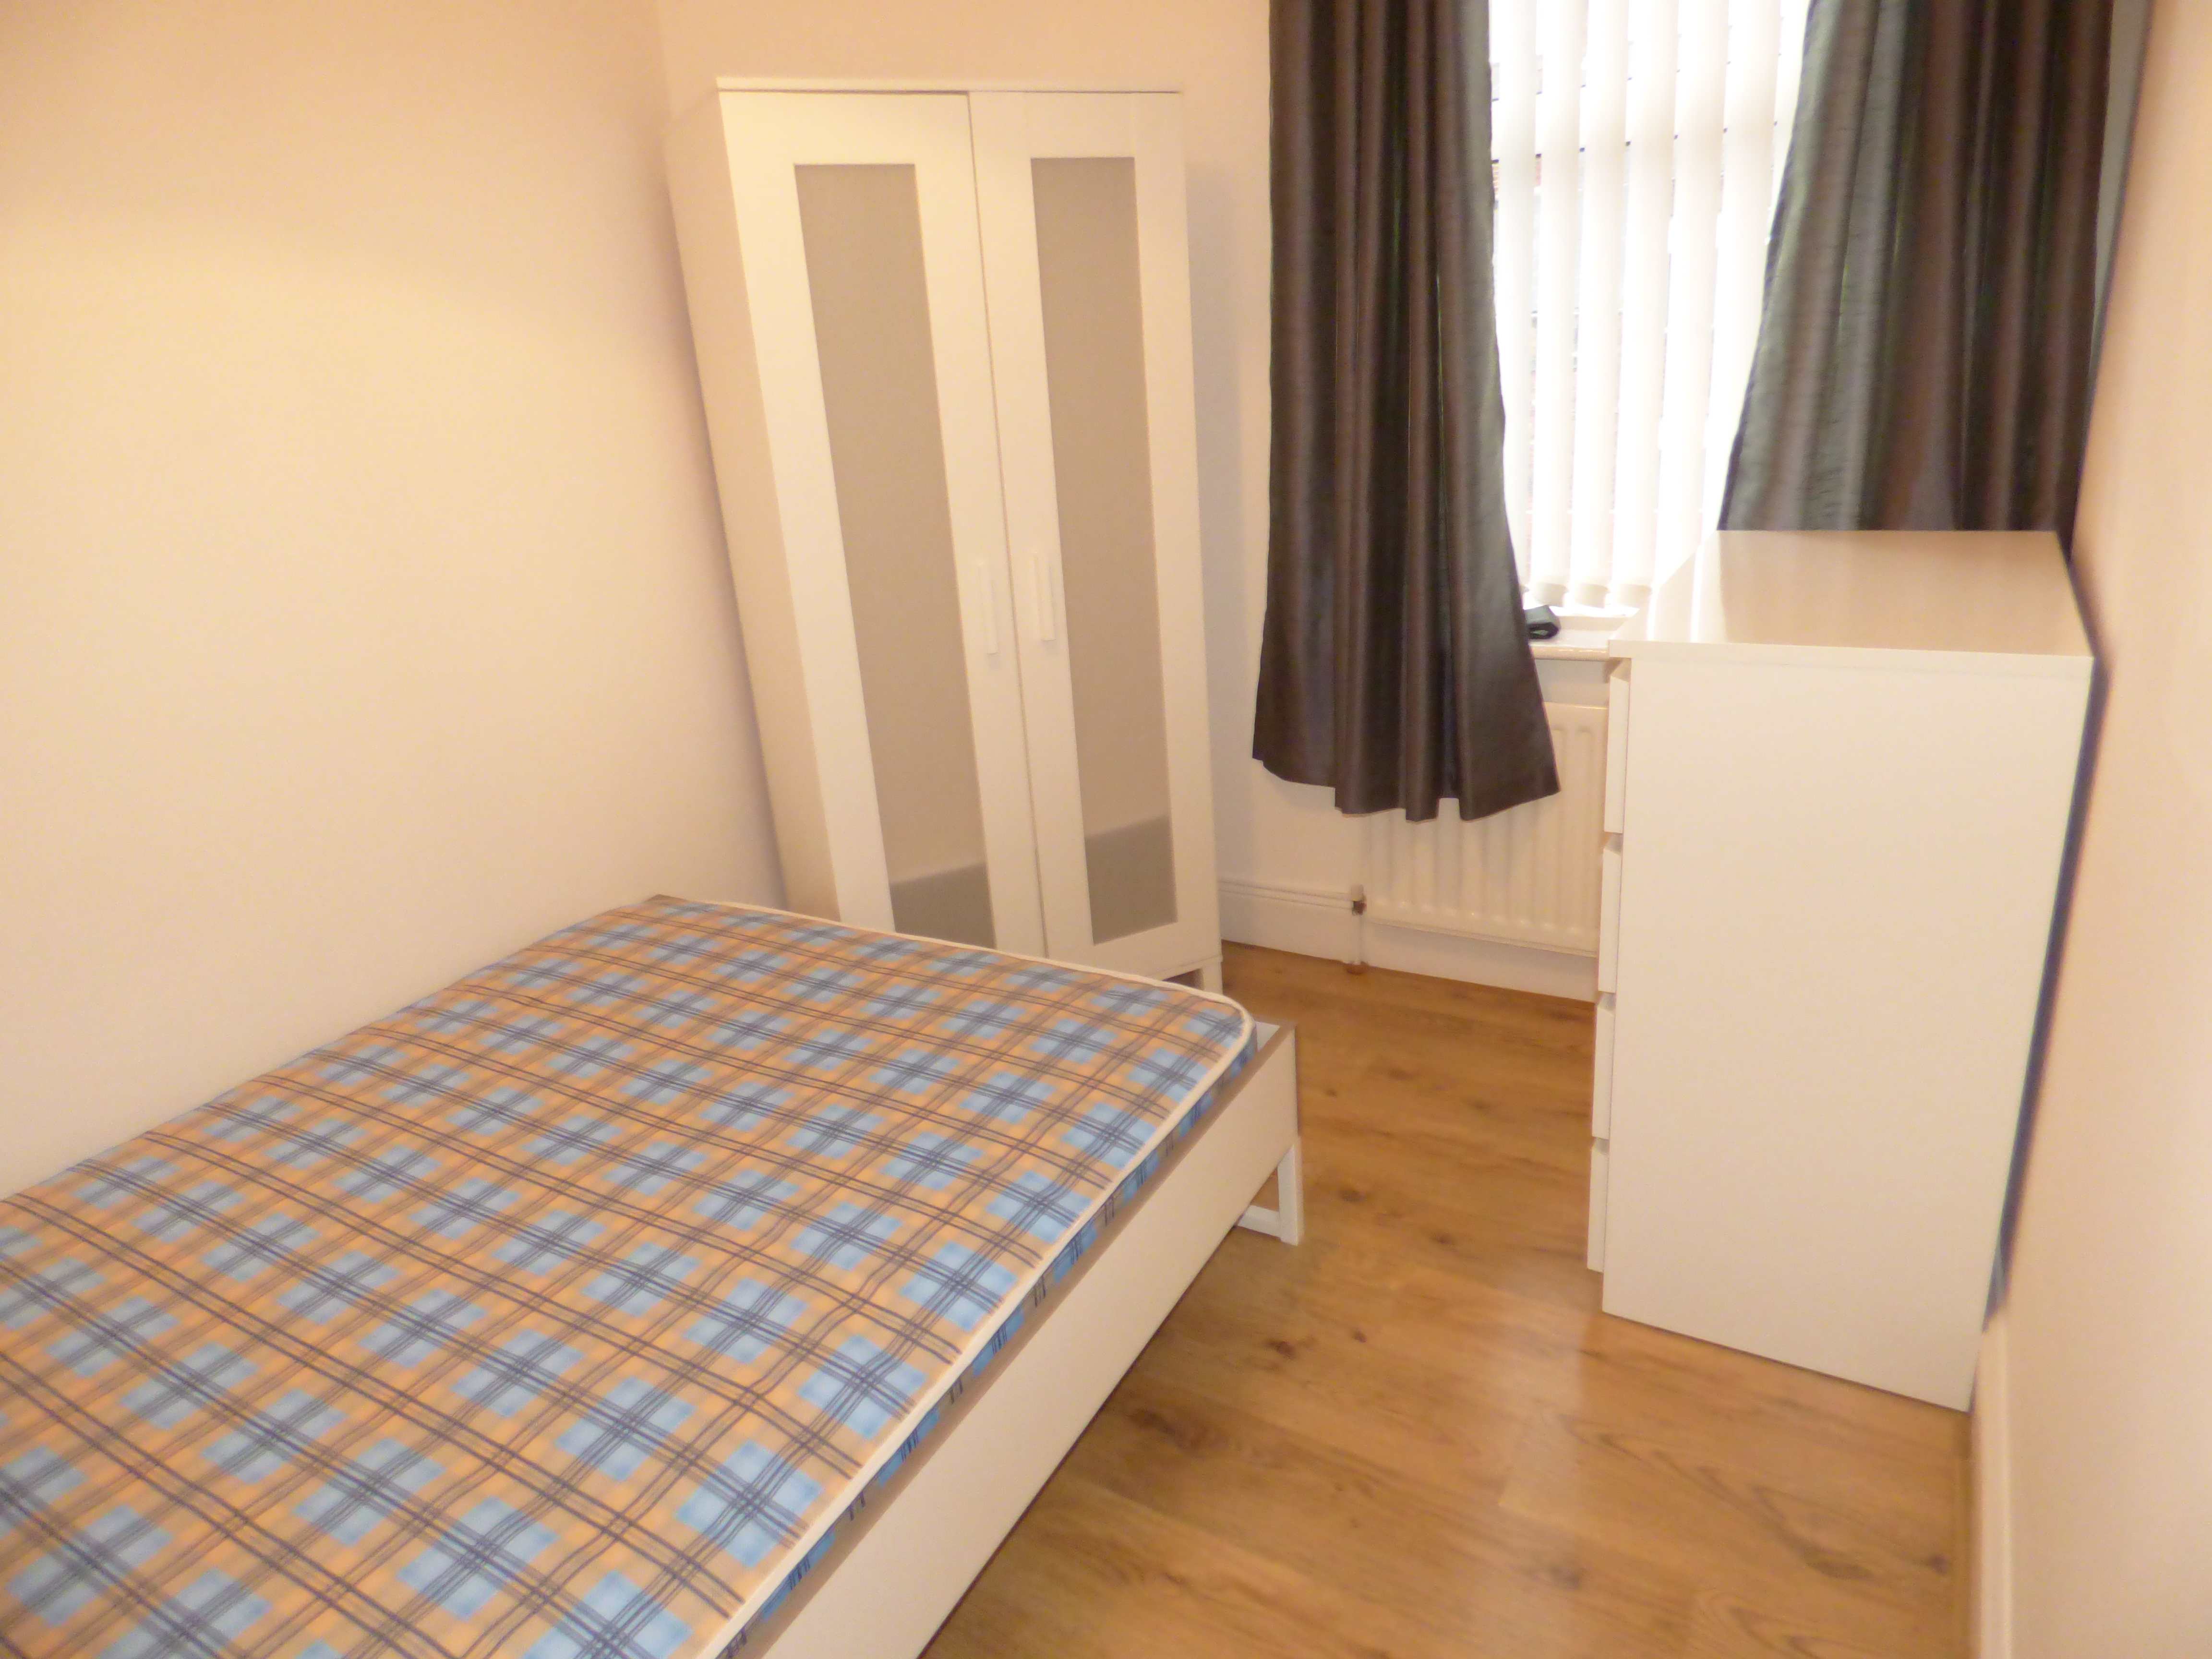 3 bed flat to rent in Warton Terrace, Newcastle upon tyne  - Property Image 6